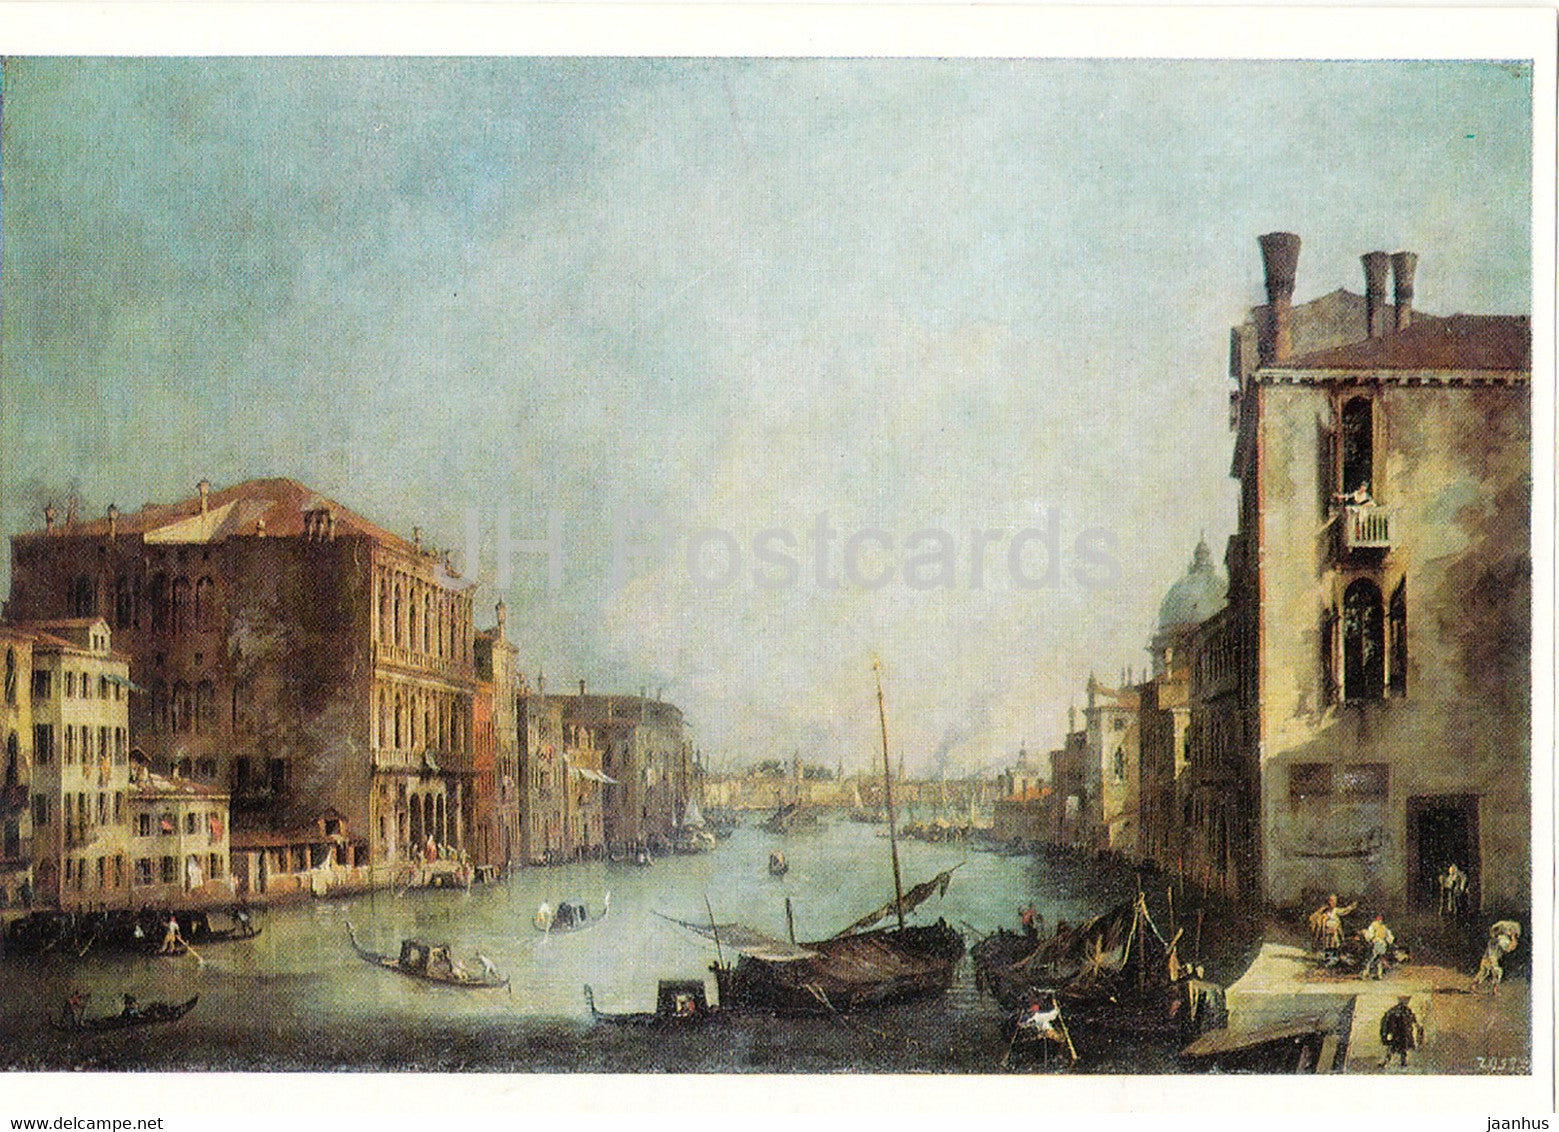 painting by Canaletto - Der Canal Grande in Venedig - Venice - Venezia - Italian art - Germany DDR - unused - JH Postcards